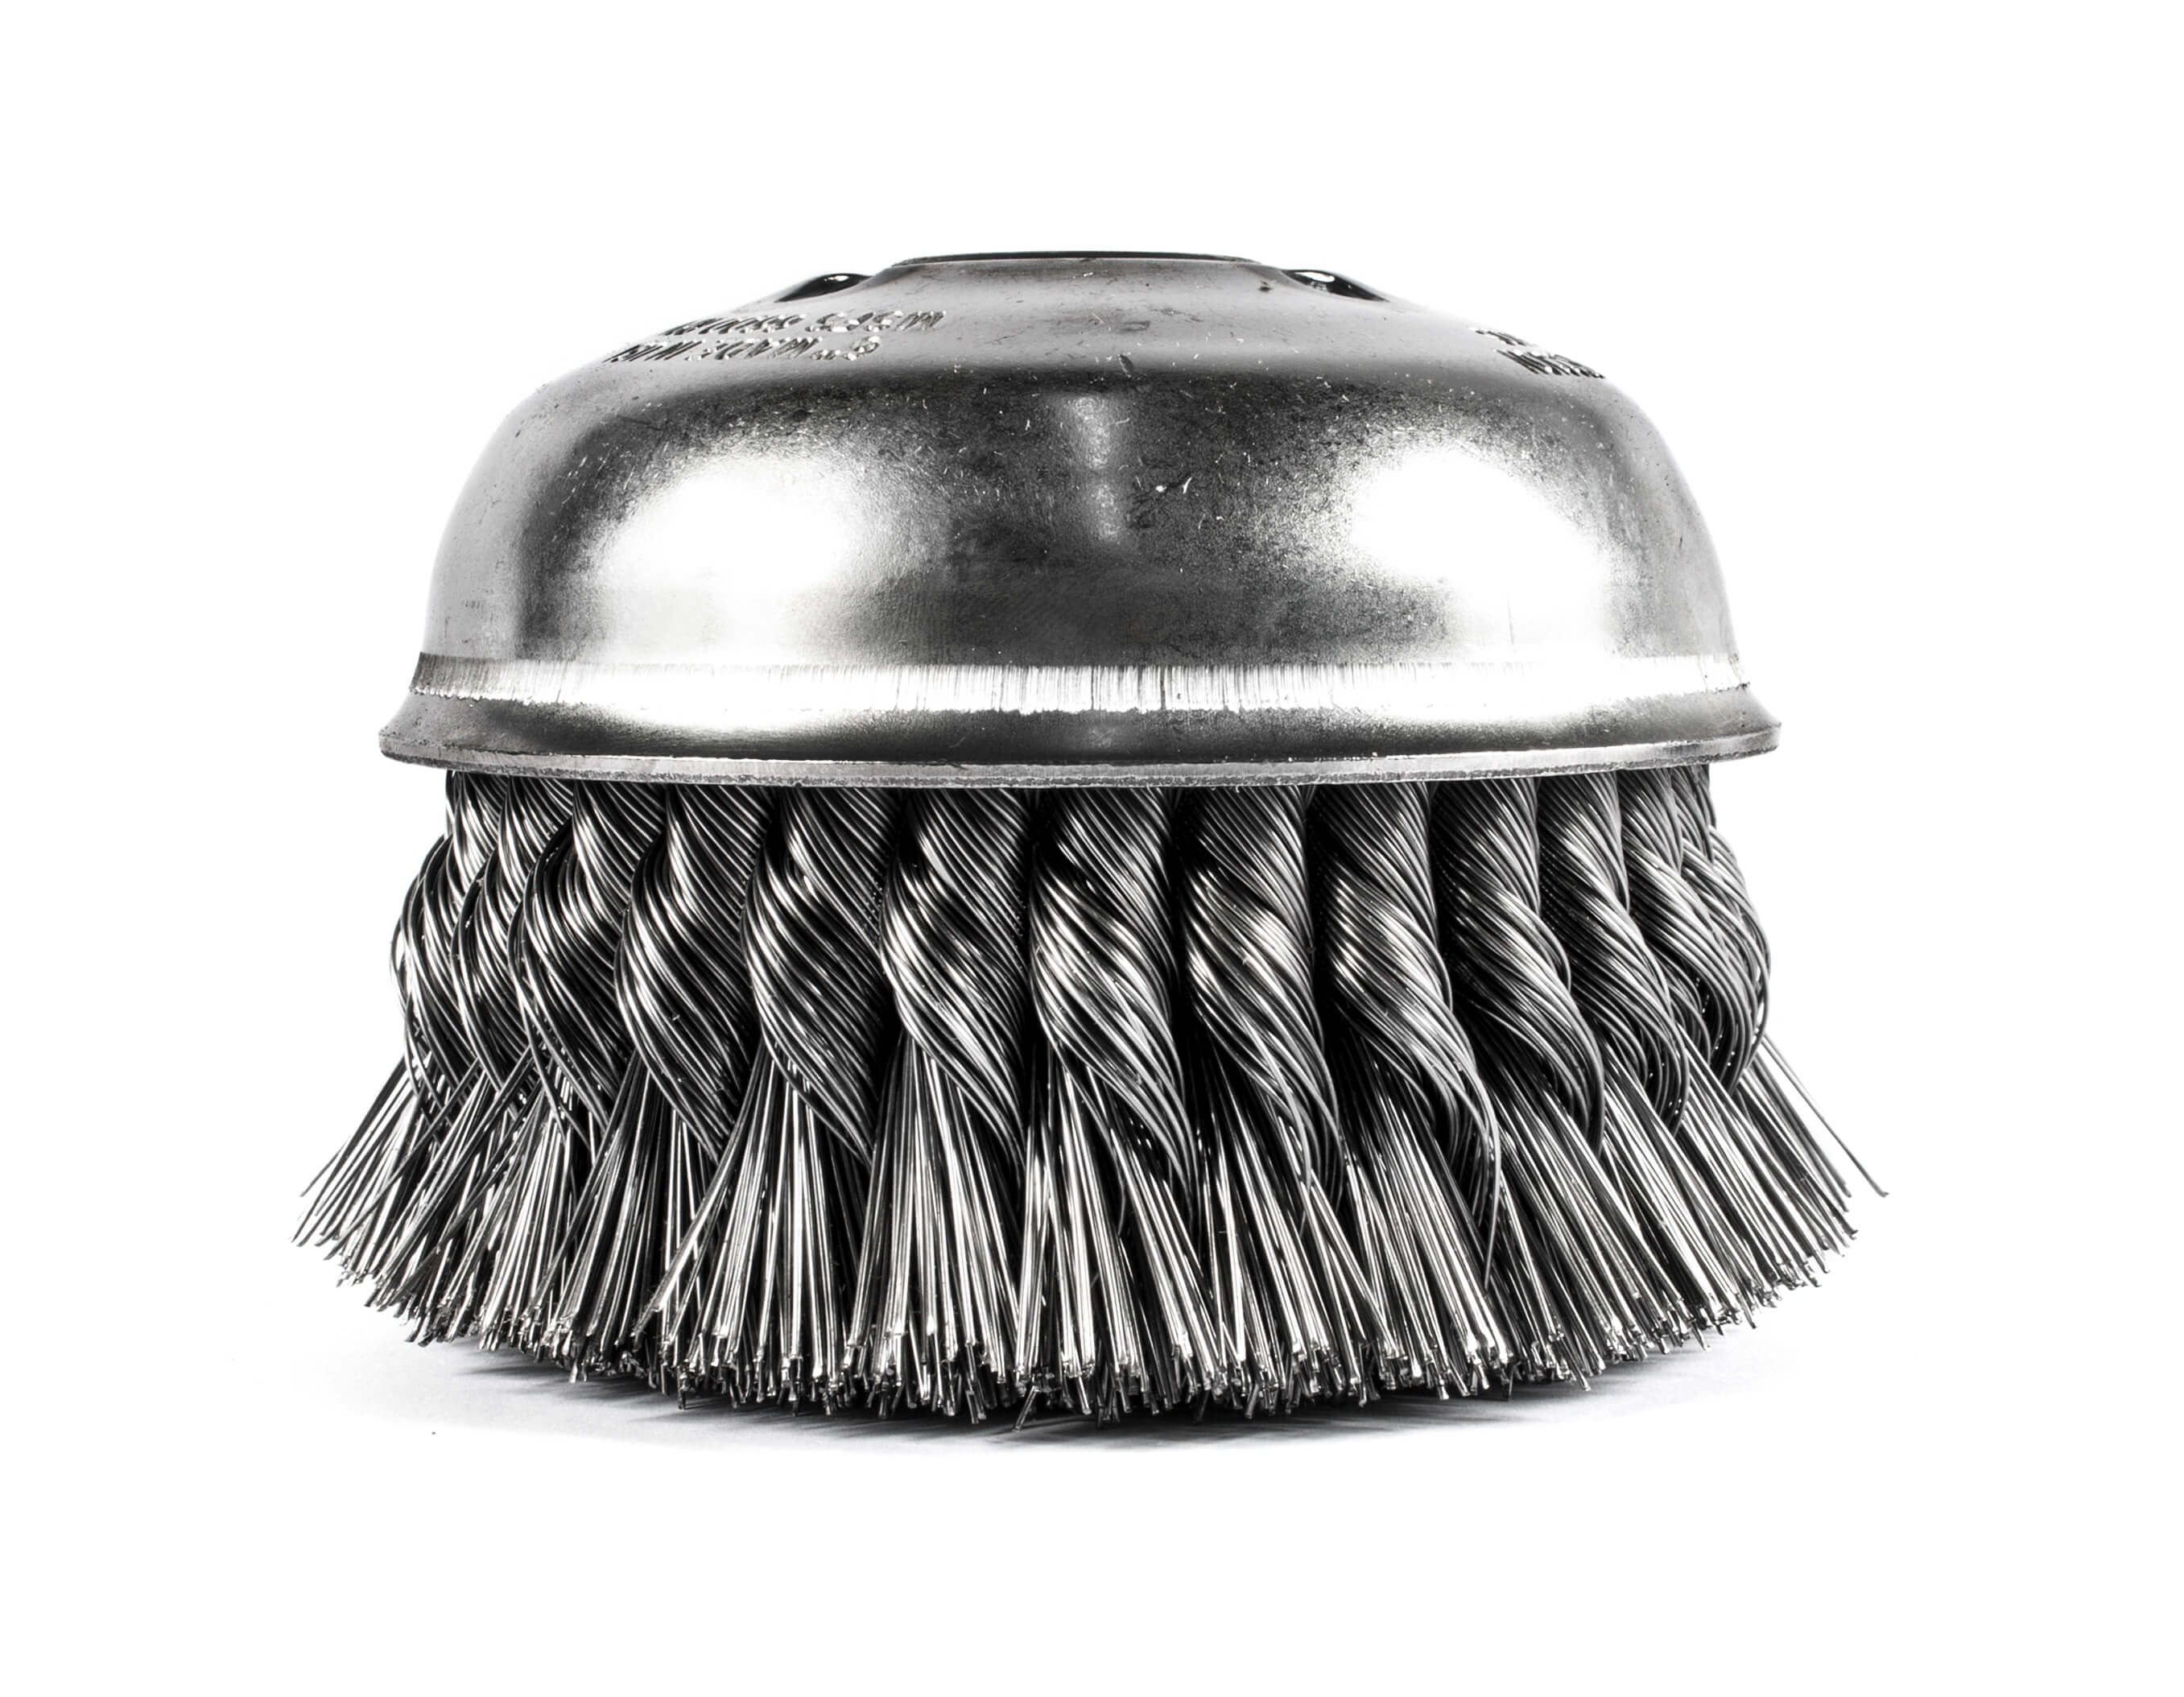 6" KNOT STYLE CUP BRUSH STEEL 5/8-11 HOLE